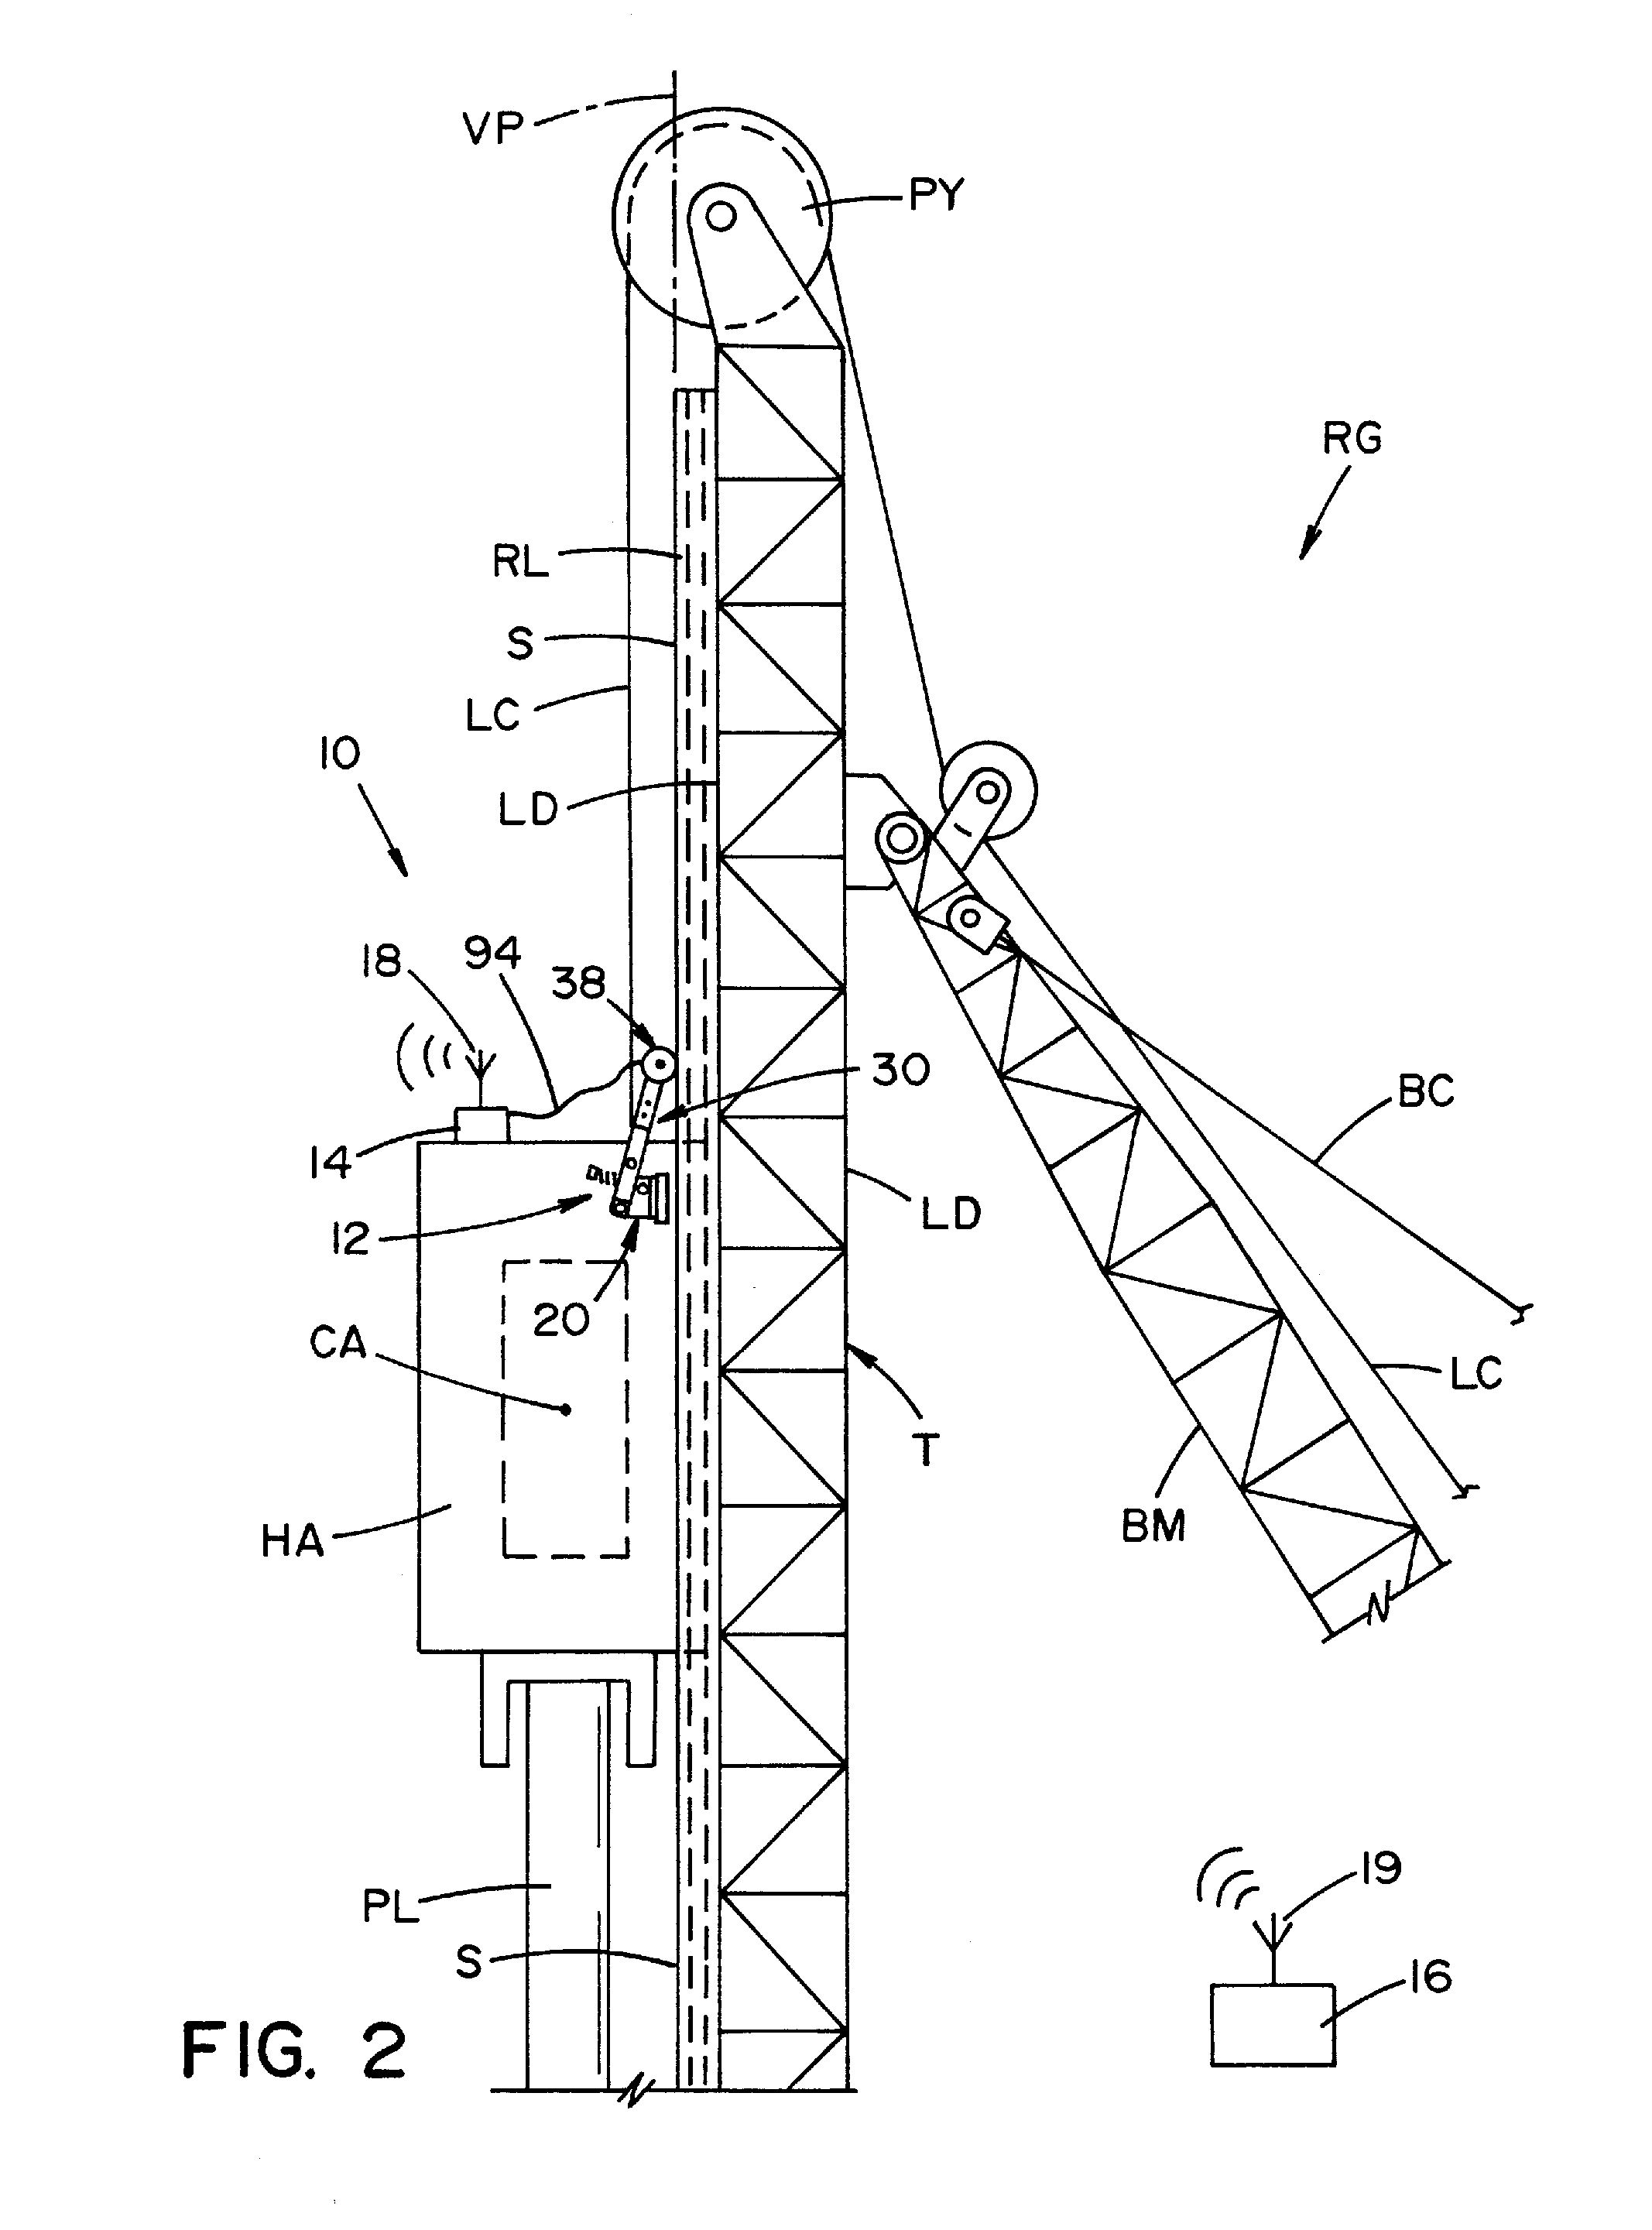 Measurement device and a system and method for using the same